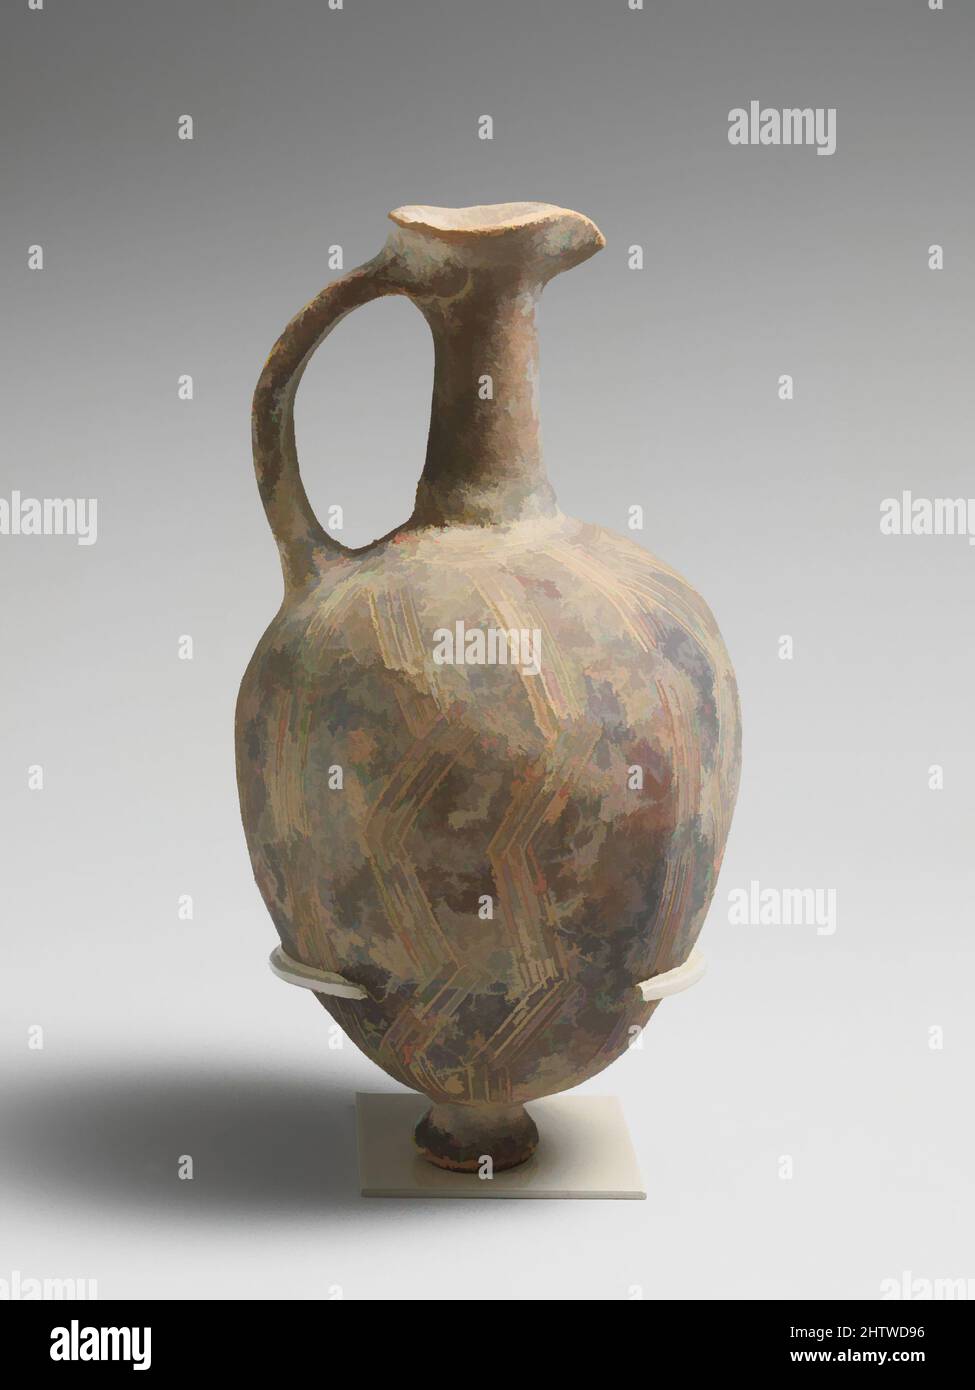 Art inspired by Terracotta jug, Middle Cypriot III, ca. 1725–1600 B.C., Cypriot, Terracotta; Black Slip Ware, H. 5 3/16 in. (13.2 cm), Vases, This type of vase, with a long narrow neck and funnel spout, may have contained perfumed oils. The shape and engraved decoration were probably, Classic works modernized by Artotop with a splash of modernity. Shapes, color and value, eye-catching visual impact on art. Emotions through freedom of artworks in a contemporary way. A timeless message pursuing a wildly creative new direction. Artists turning to the digital medium and creating the Artotop NFT Stock Photo